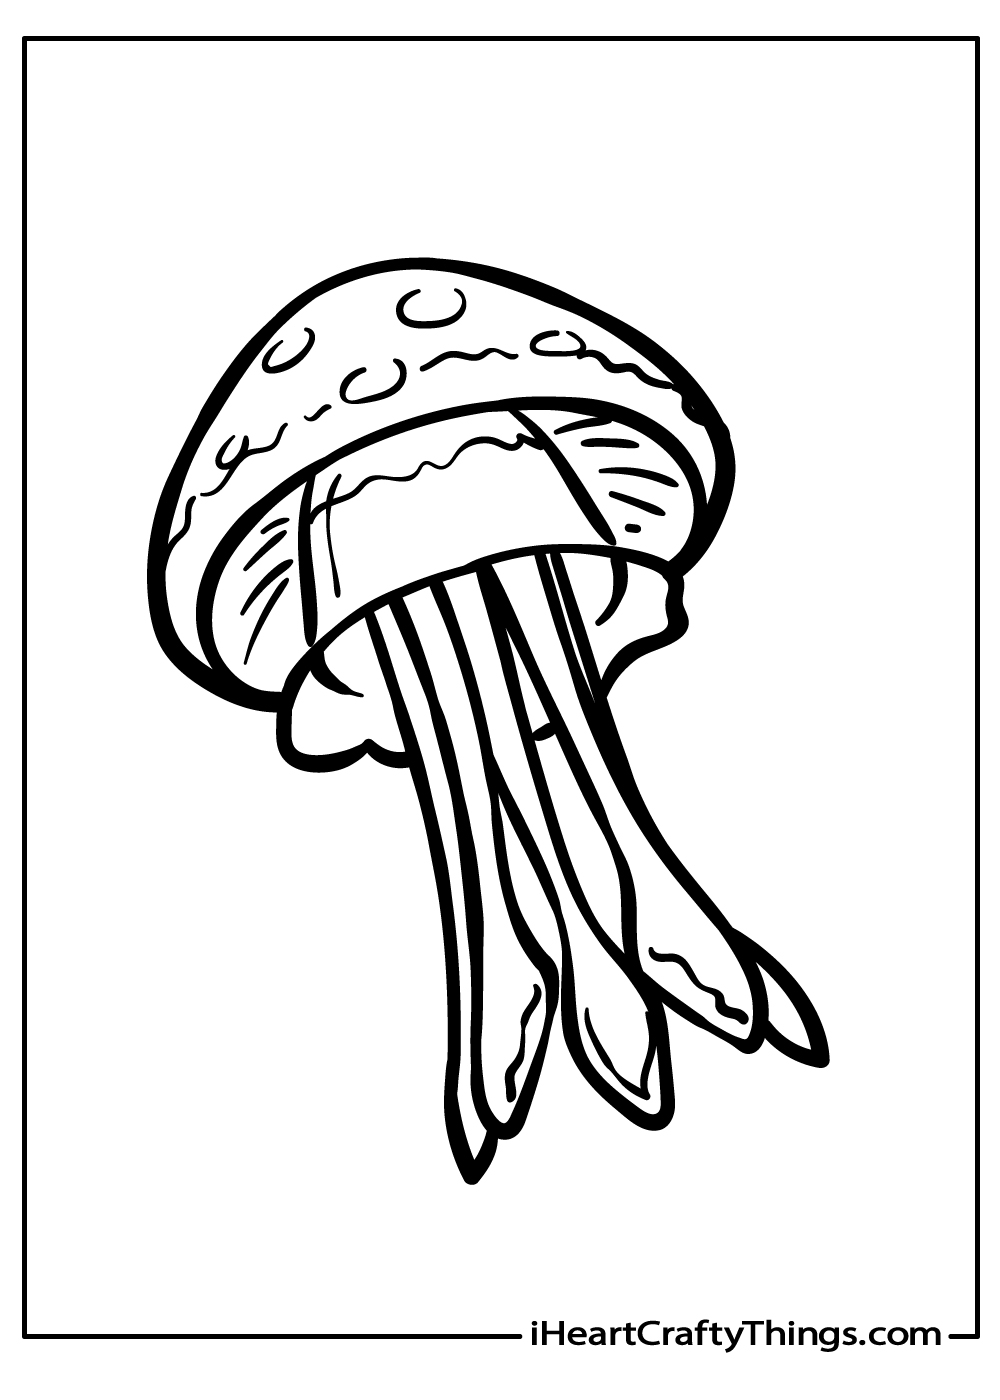 Jellyfish Coloring Pages for Kids